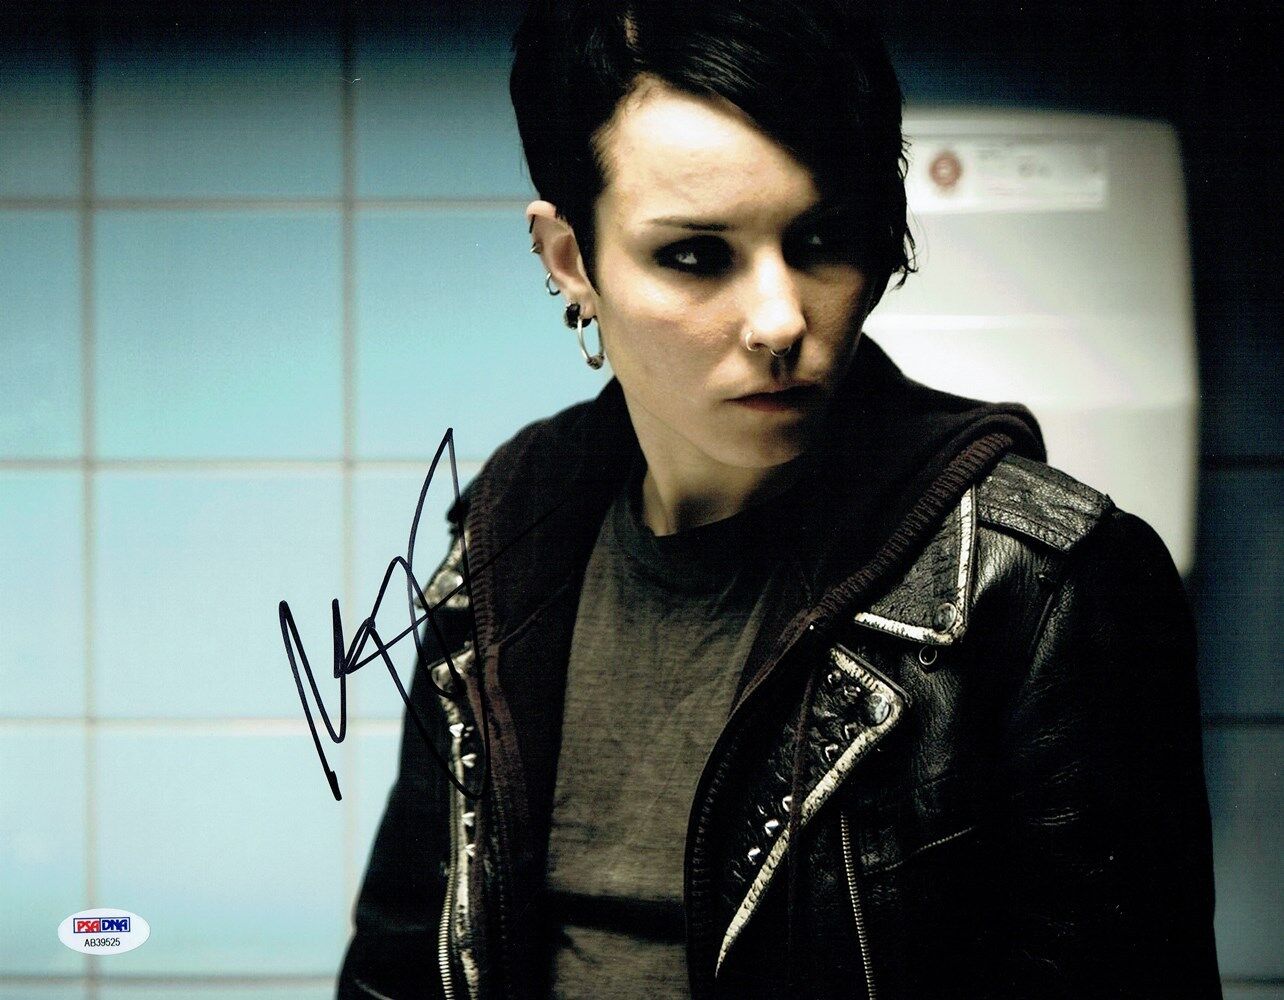 Noomi Rapace Signed Dragon Tattoo Autographed 11x14 Photo Poster painting PSA/DNA #AB39525